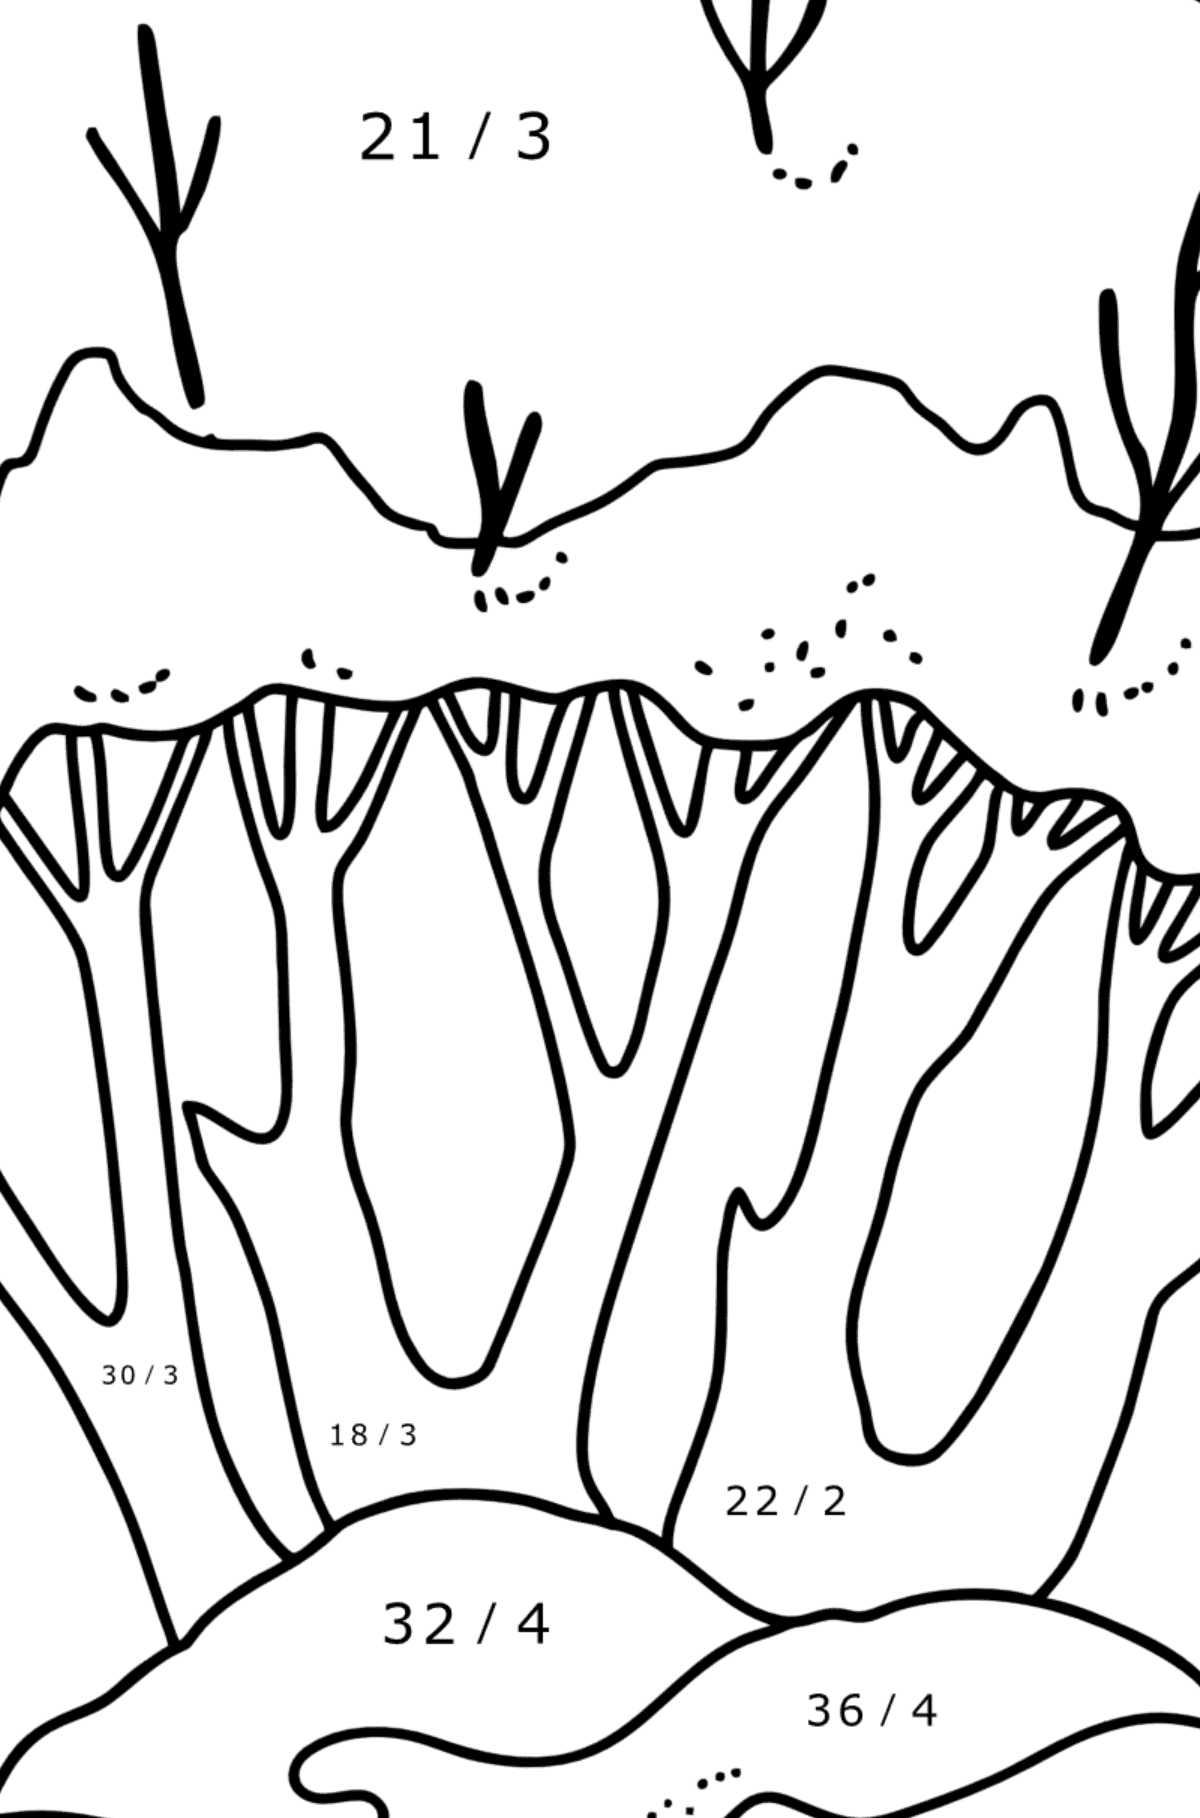 Winter Trees coloring page - Math Coloring - Division for Kids